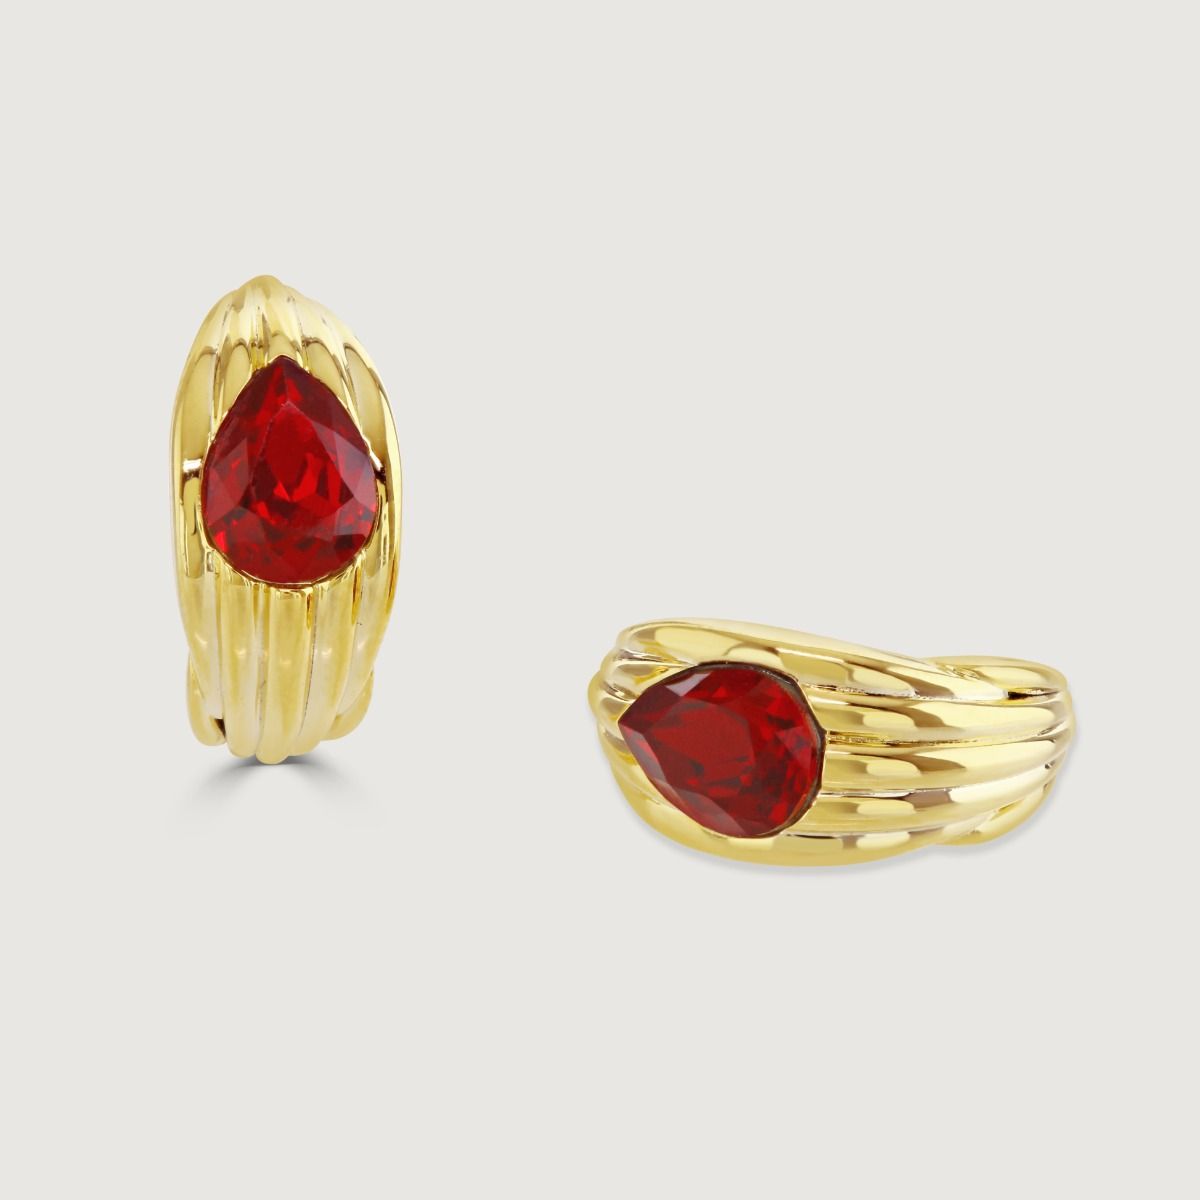 The Praline Huggie Earring ingeniously imitates the praline's texture through debossed vertical scoring. Its cocooned huggie design encases a teardrop stone at the centre, adding a burst of vivid colour. 